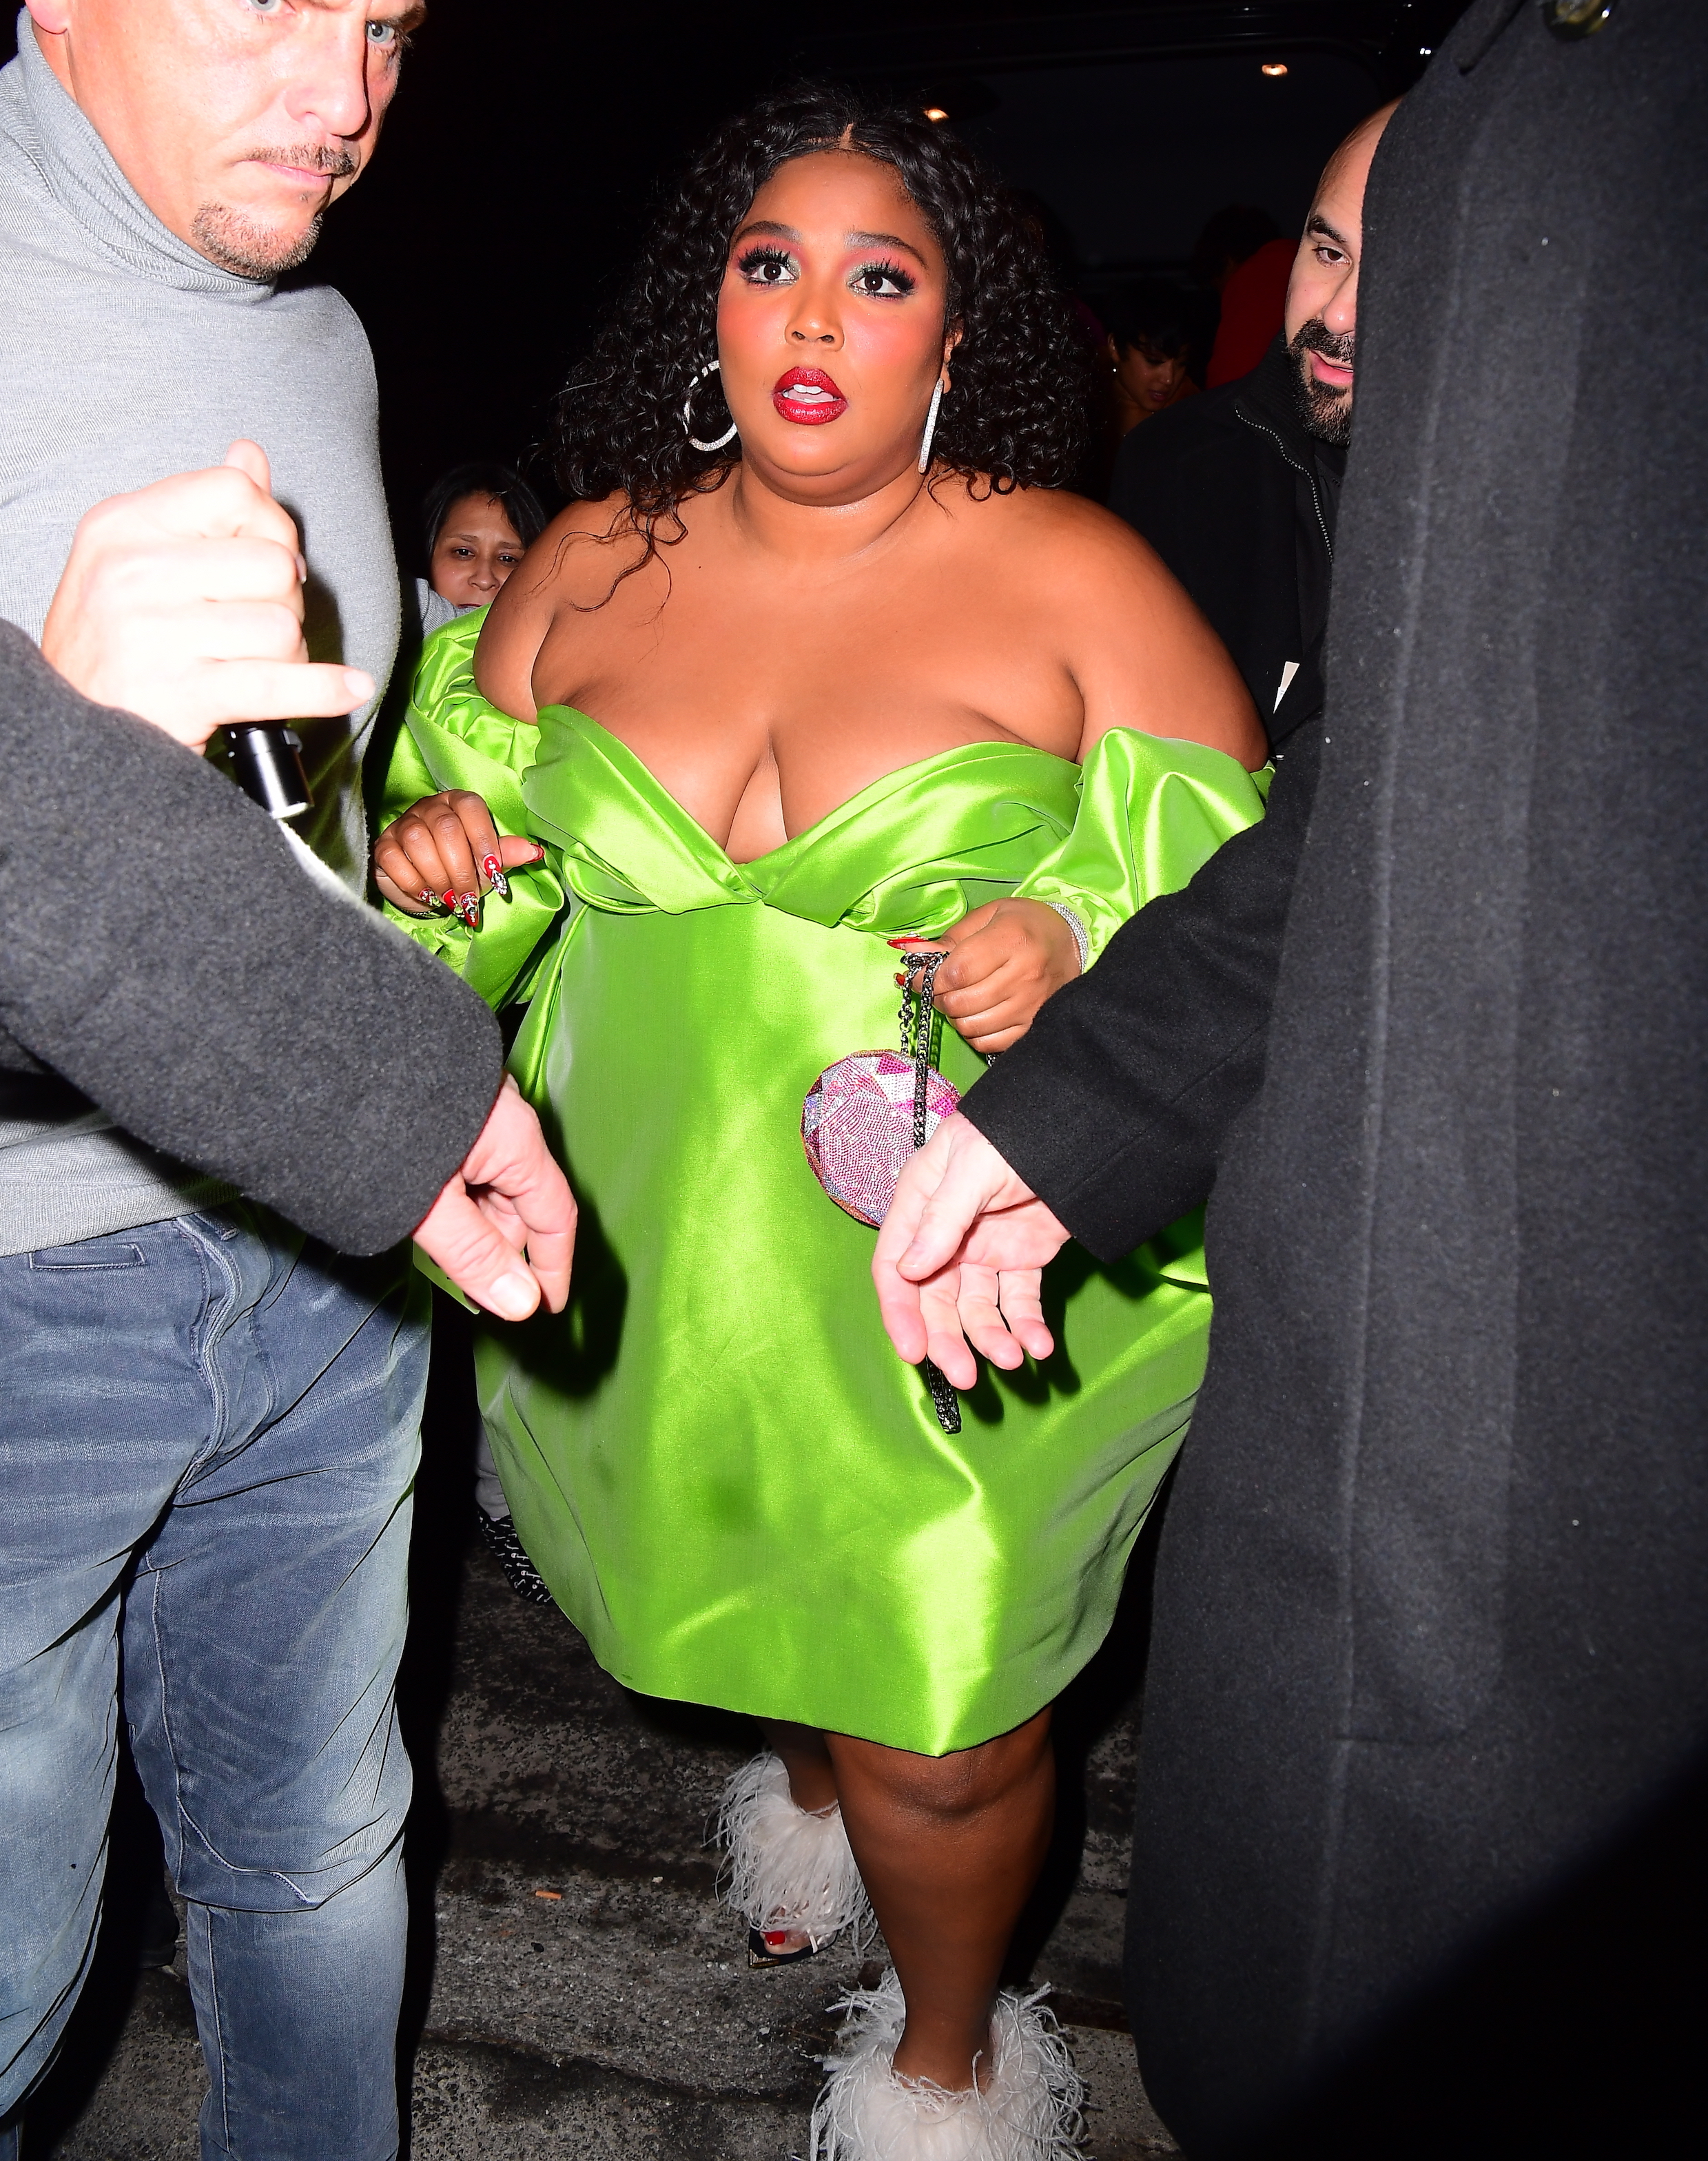 Lizzo Braless: Photos of the Singer Not Wearing a Bra